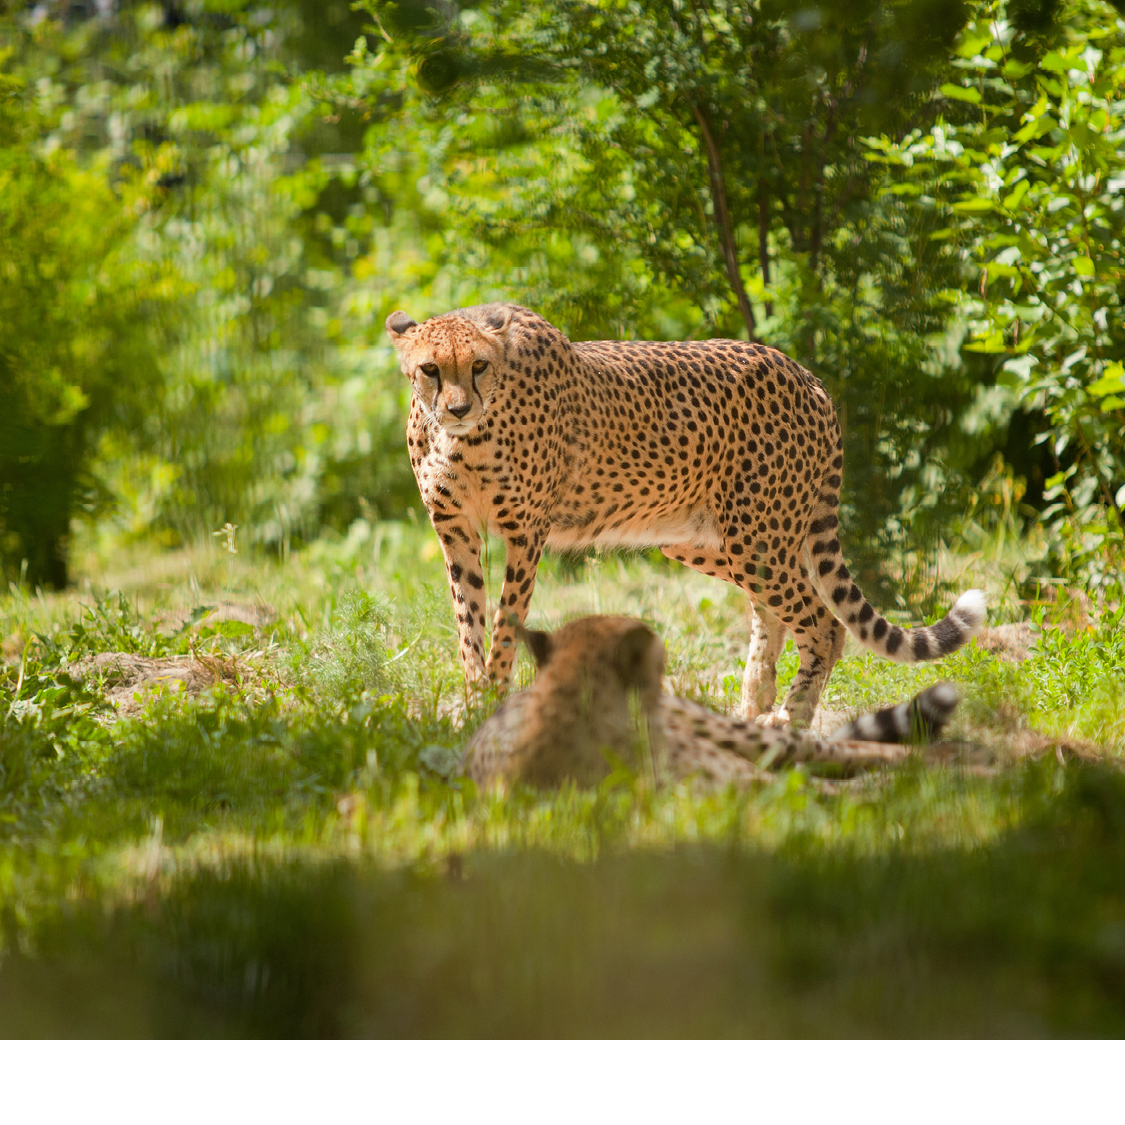 Cheetahs are large cats living in most of Africa and parts of the Middle East - photo 4